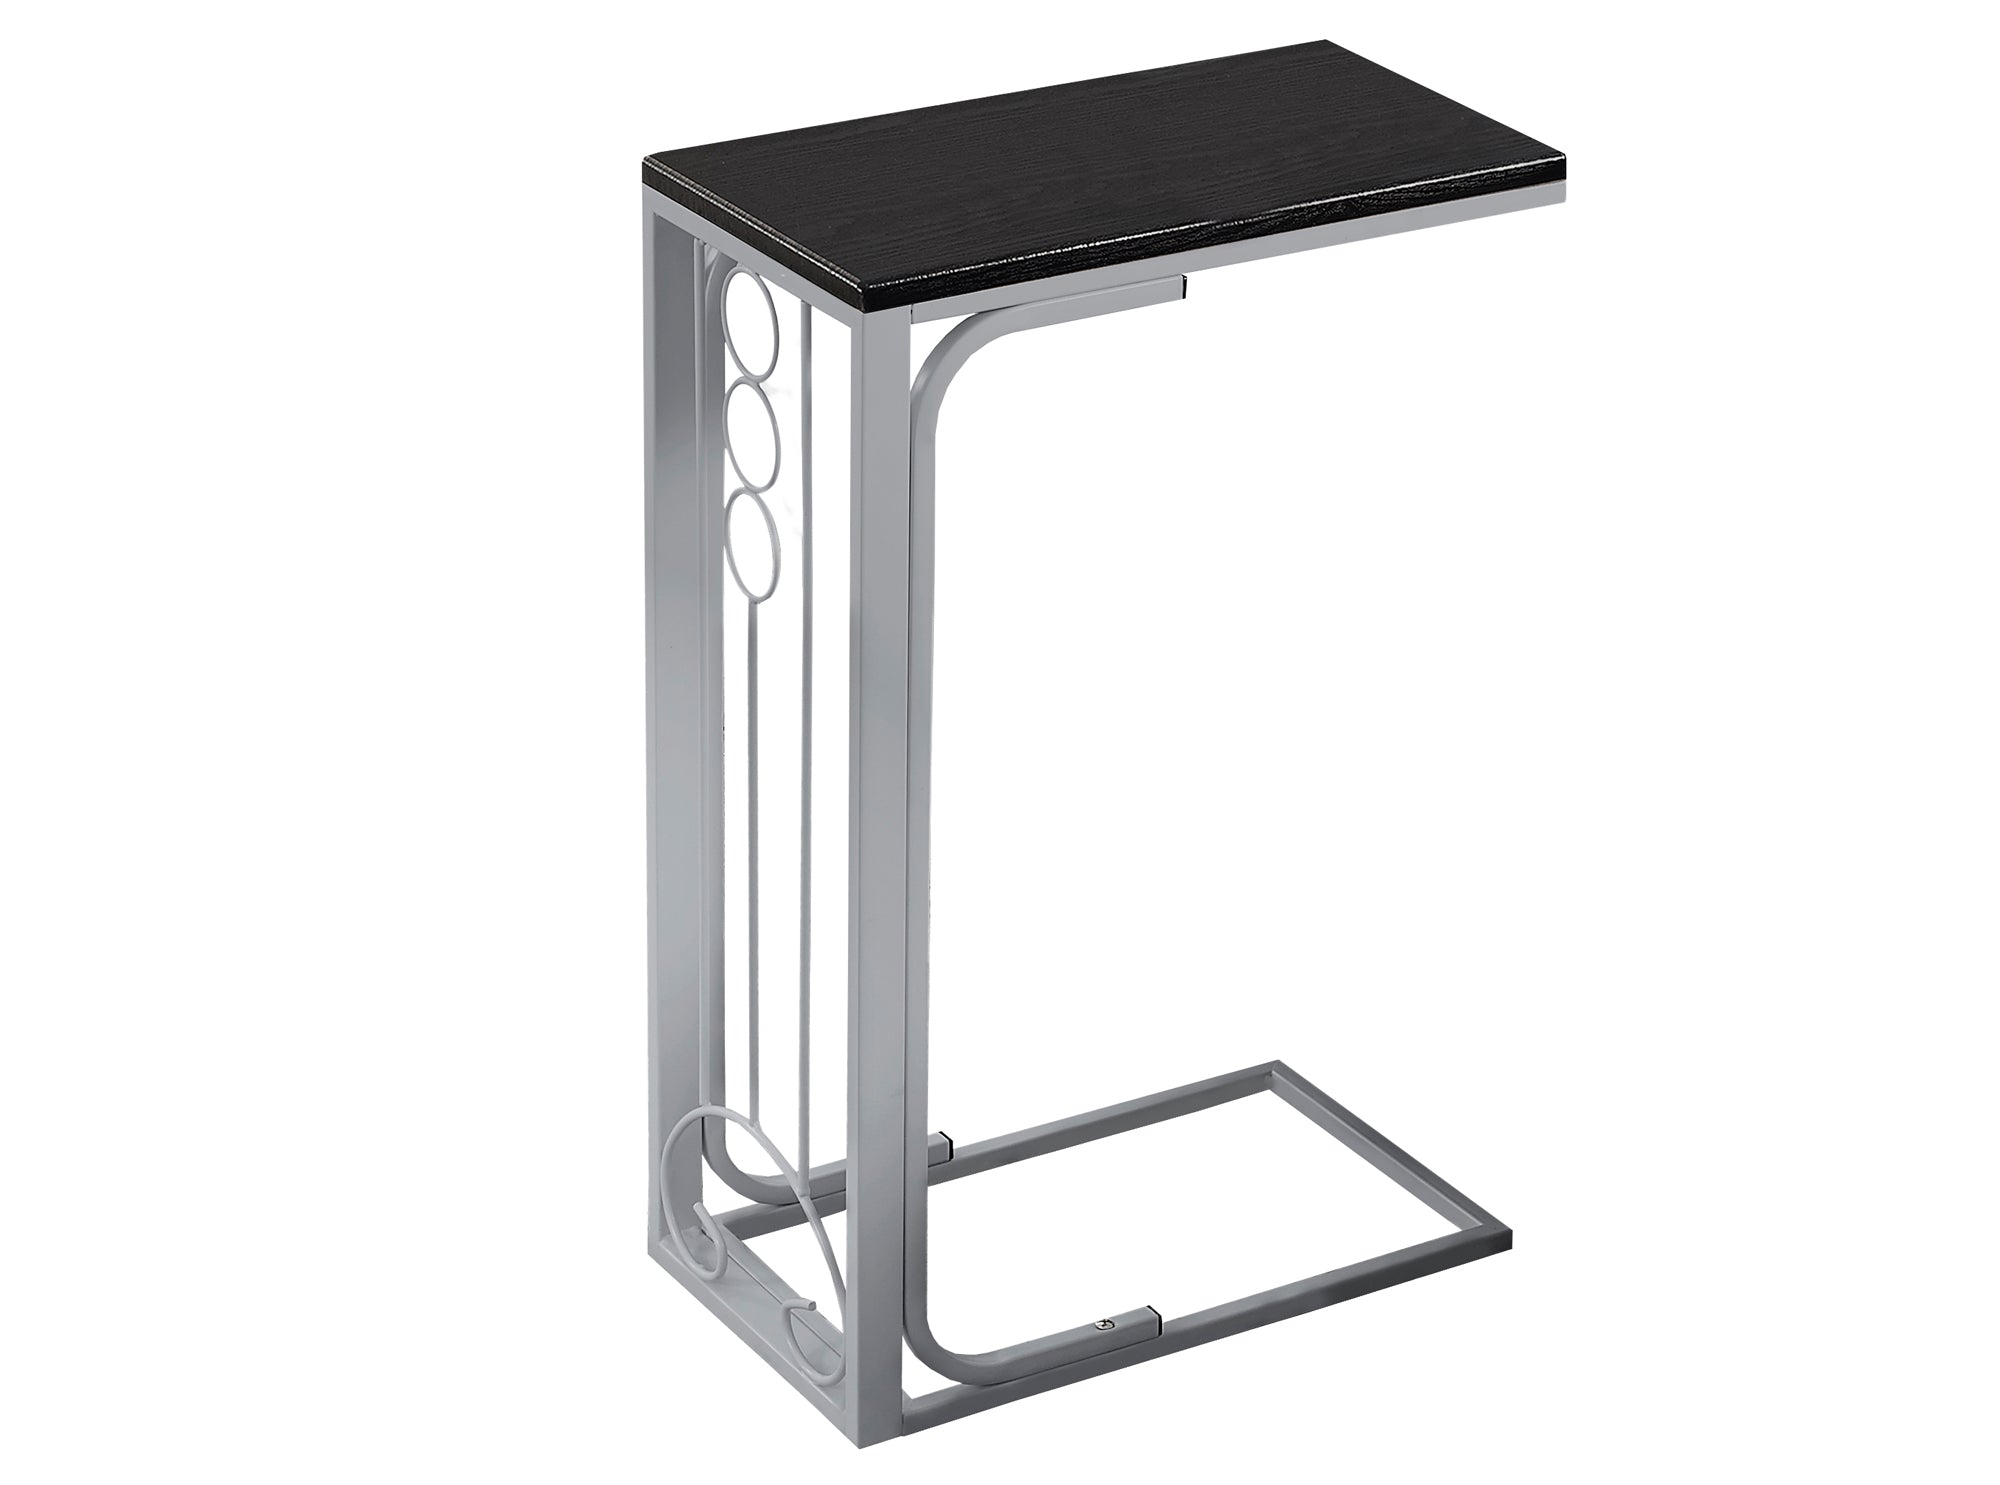 MN-423137    Accent Table, C-Shaped, End, Side, Snack, Living Room, Bedroom, Metal Legs, Laminate, Black, Silver, Contemporary, Modern